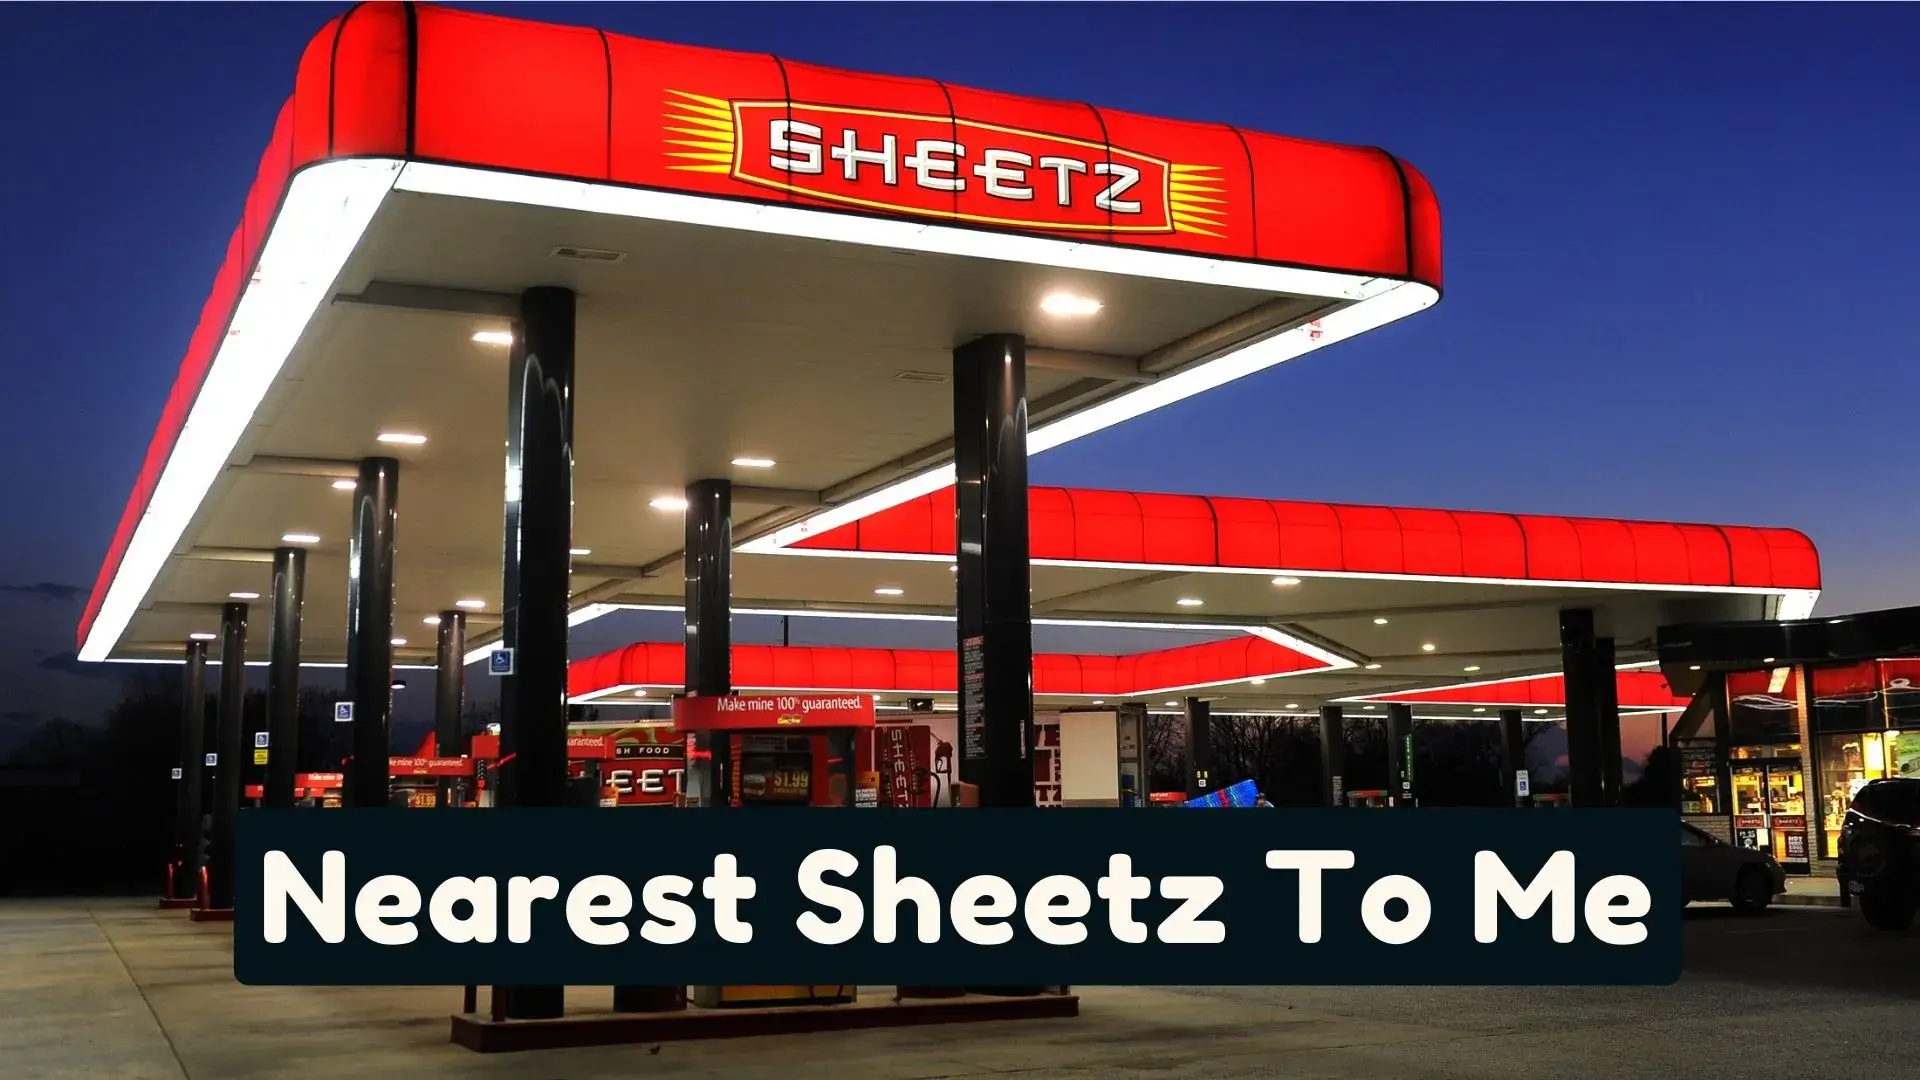 Are You Looking For Nearby Sheetz Locations | Then Read This Ultimate Guide To Find Sheetz Near Me Locations, Convenience Store & Gas Station